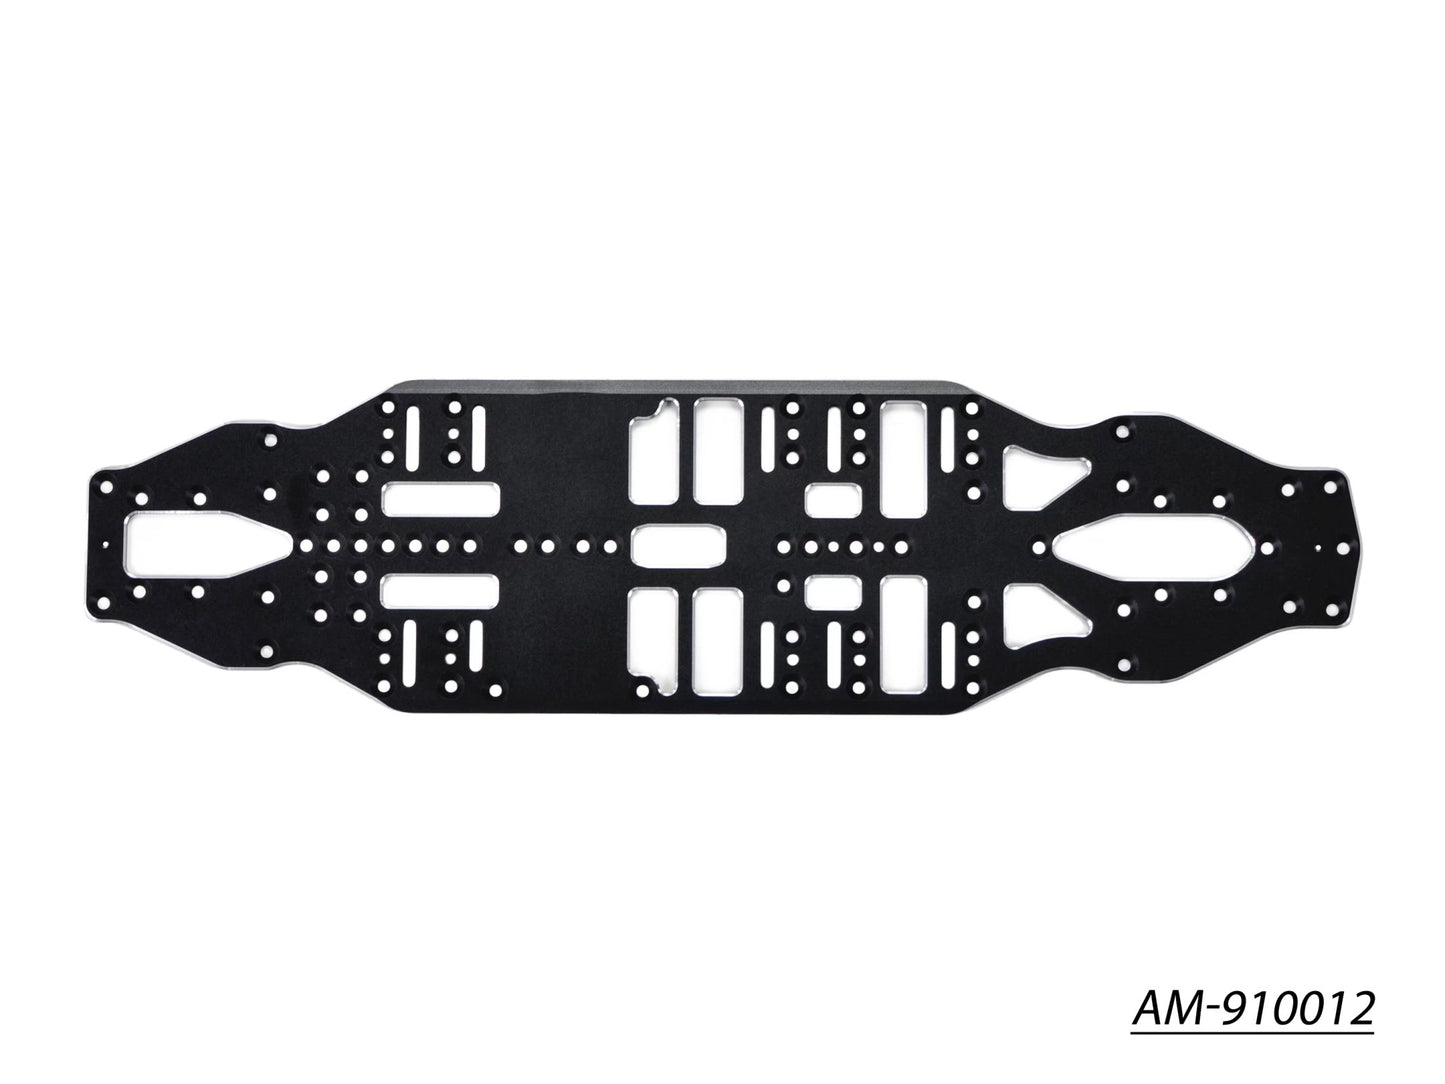 AM Medius Xray T4 MID Chassis 7075 2.0mm 
MM (AM-910012)